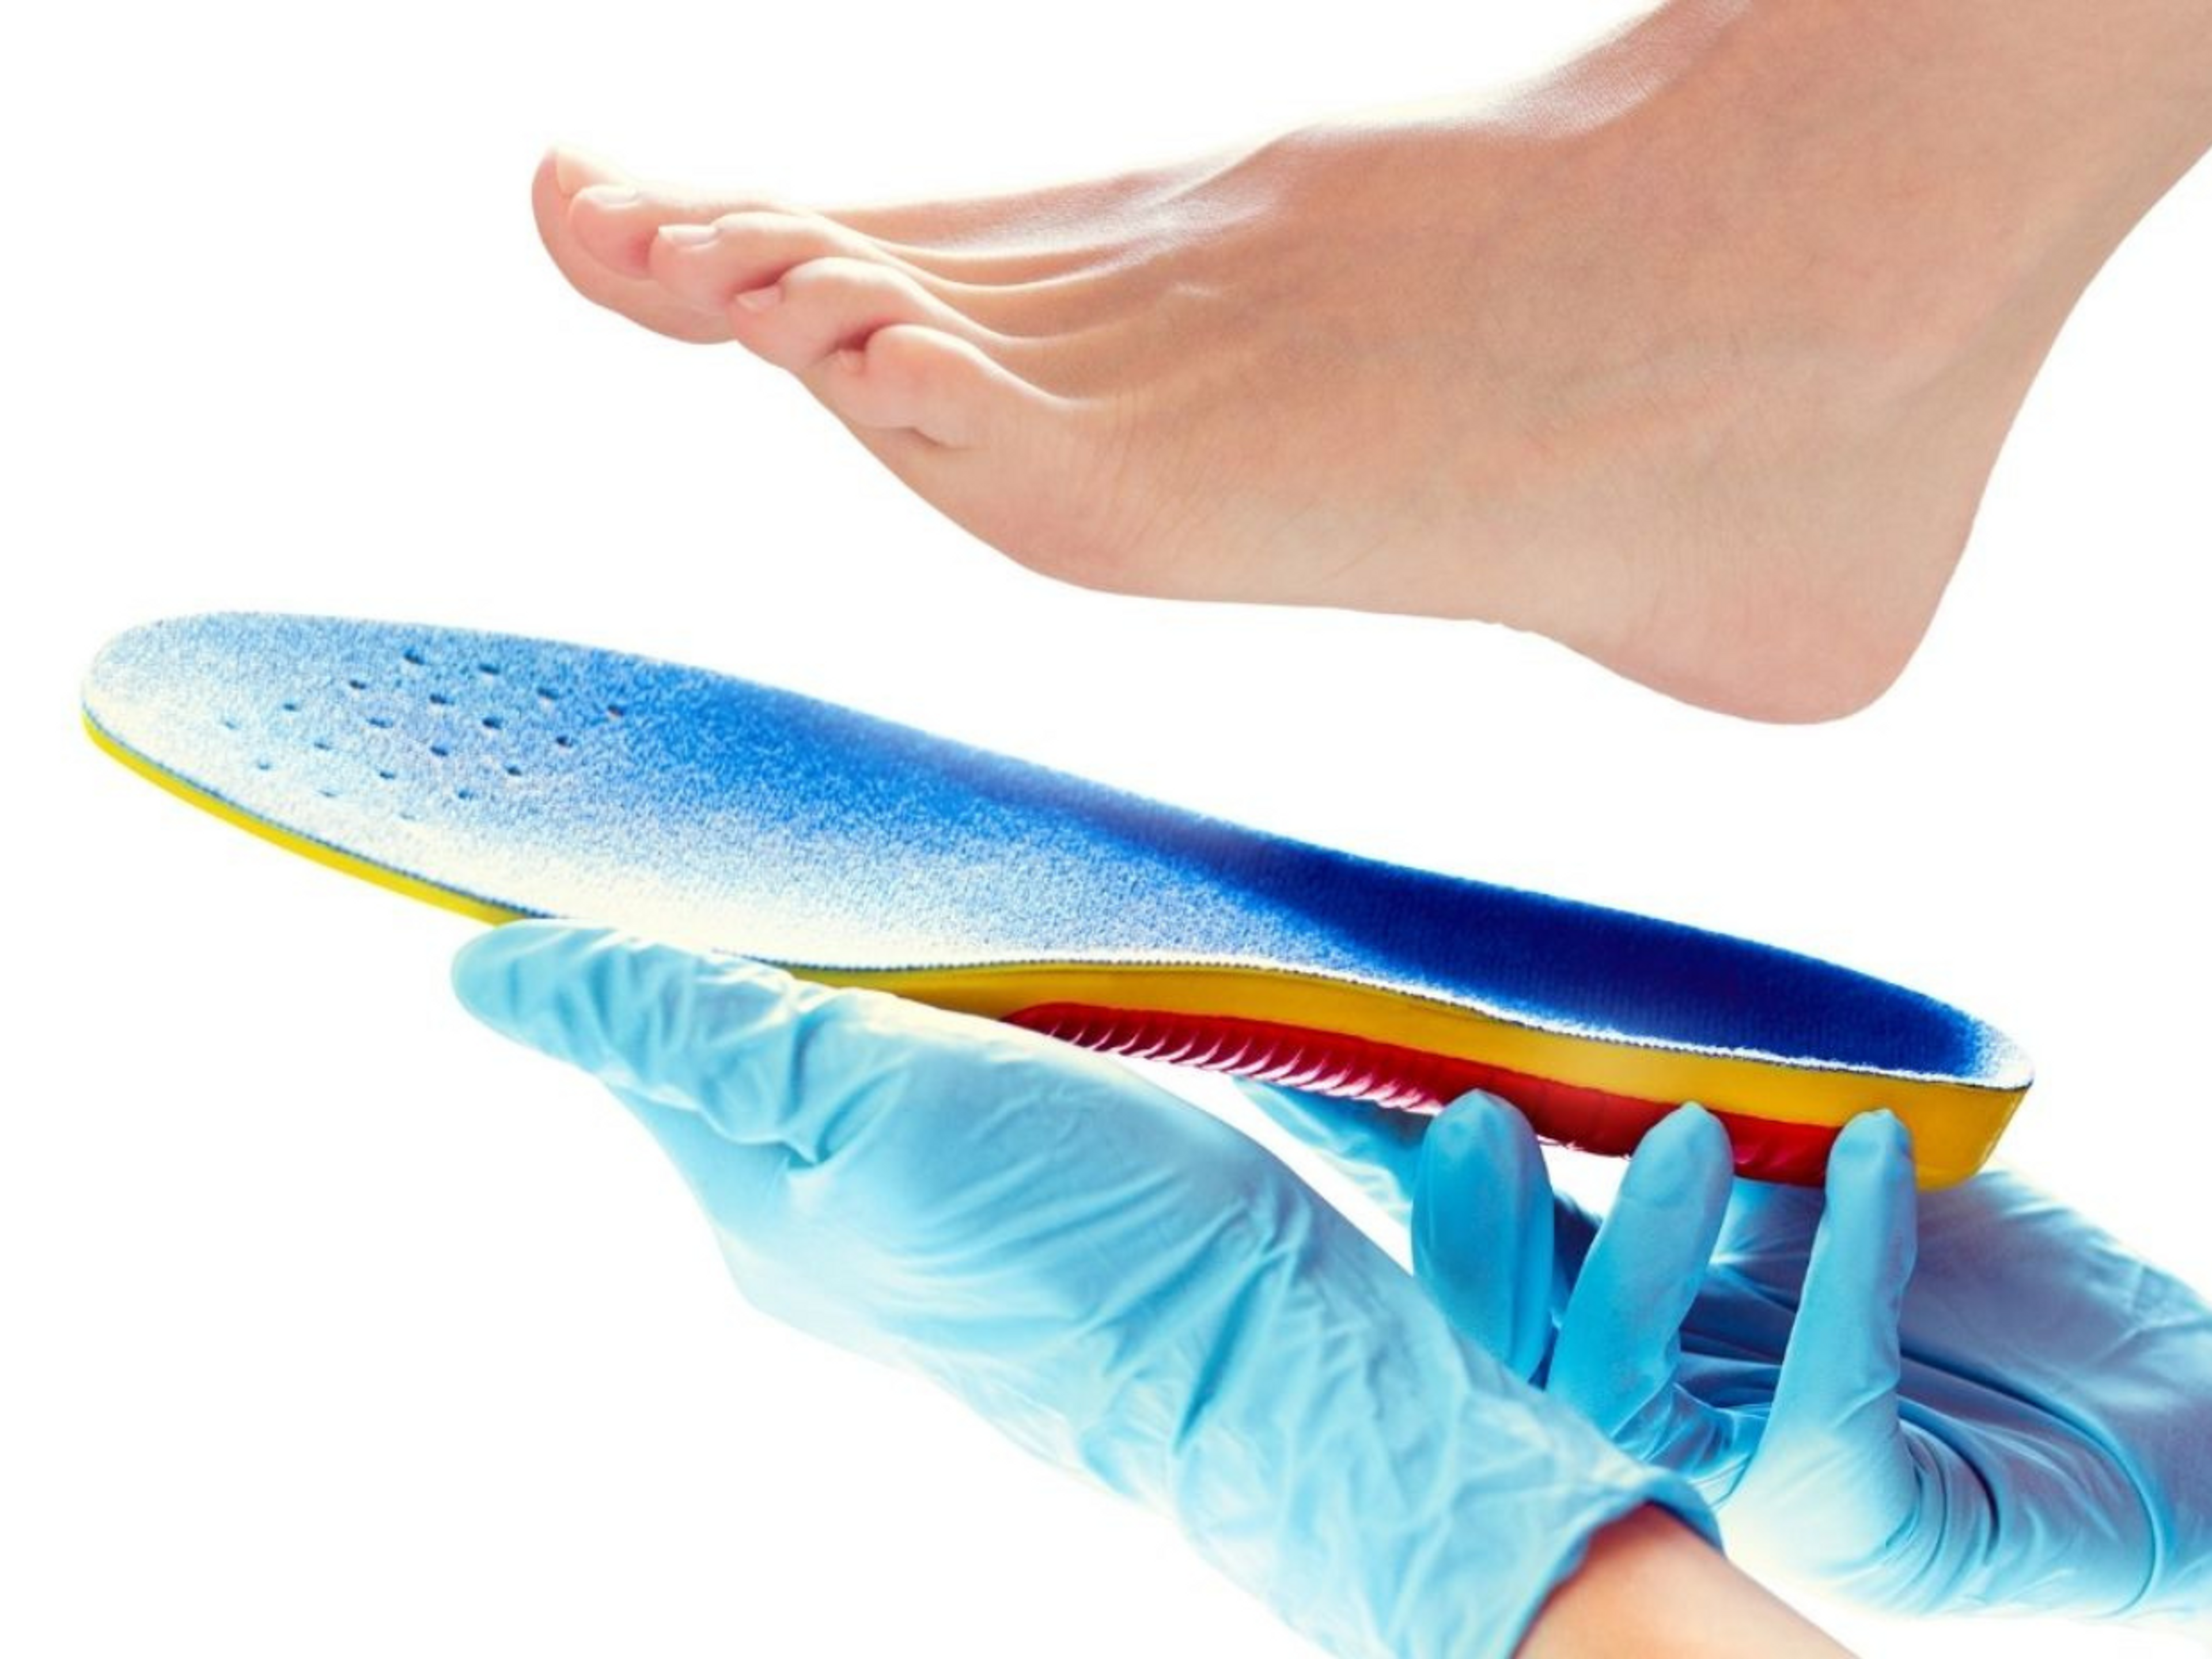 Orthotics can be useful as part of the treatment for plantar fasciitis, but will not work for everyone.